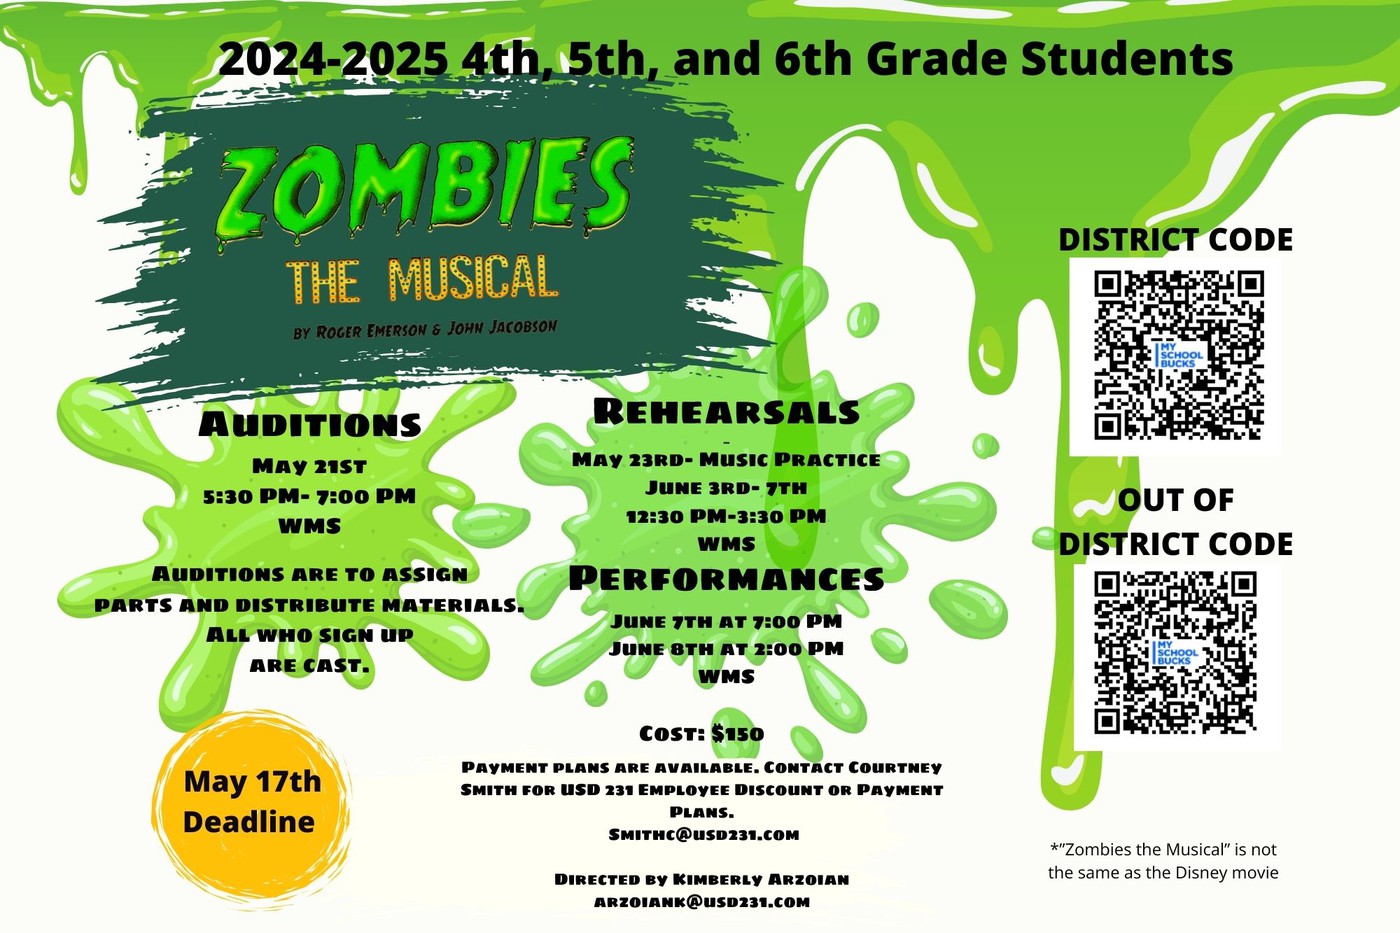 Zombies the Musical theater enrollment information